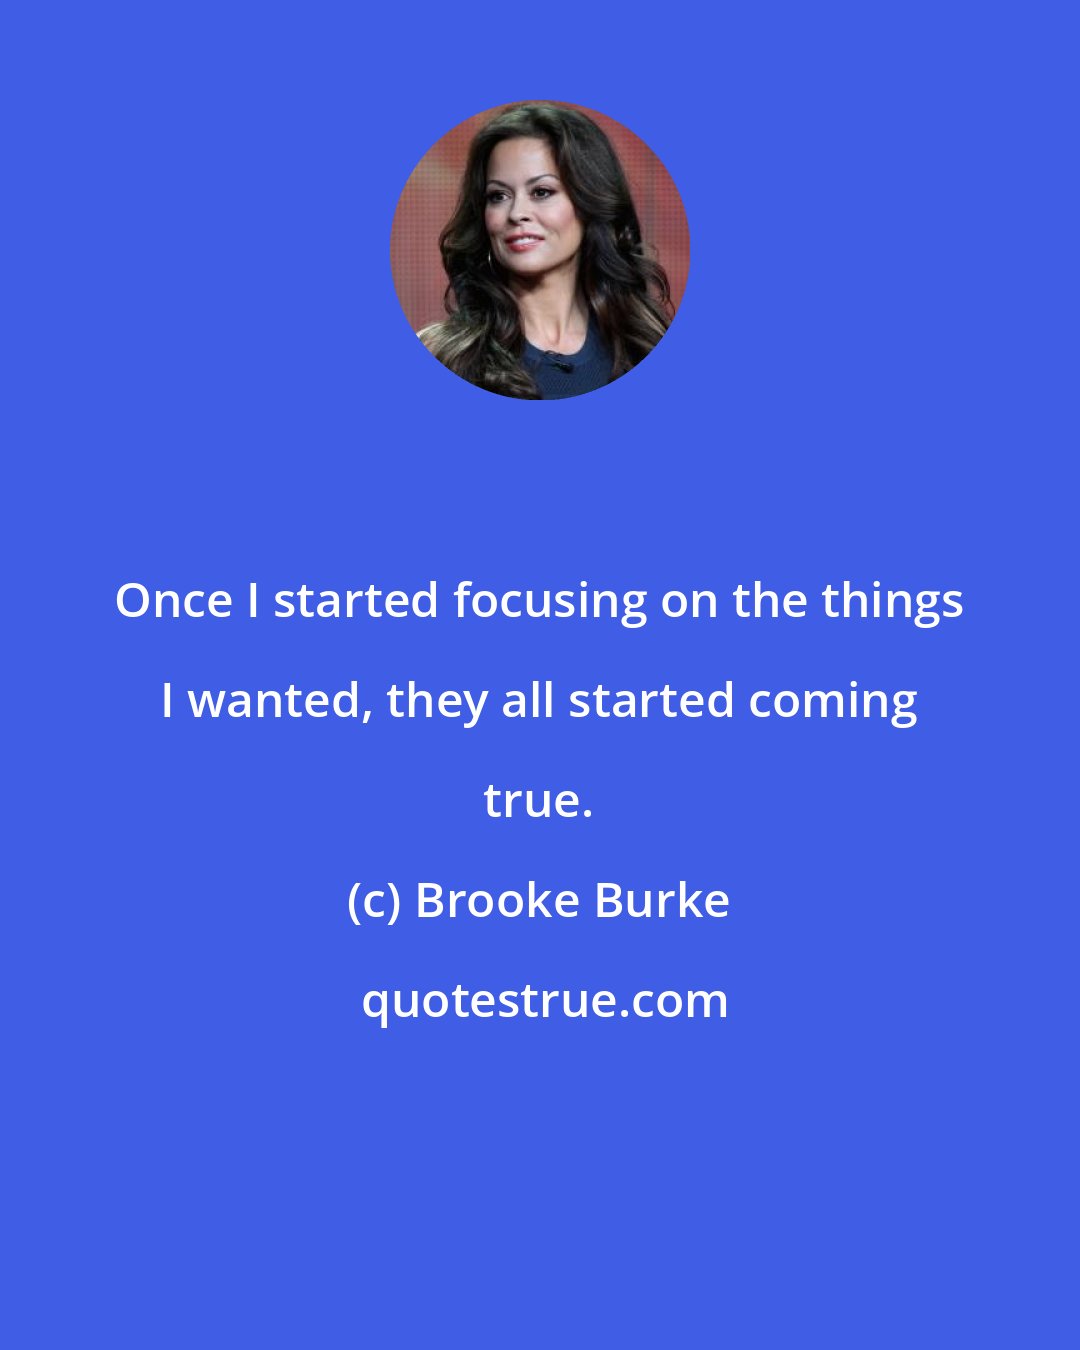 Brooke Burke: Once I started focusing on the things I wanted, they all started coming true.